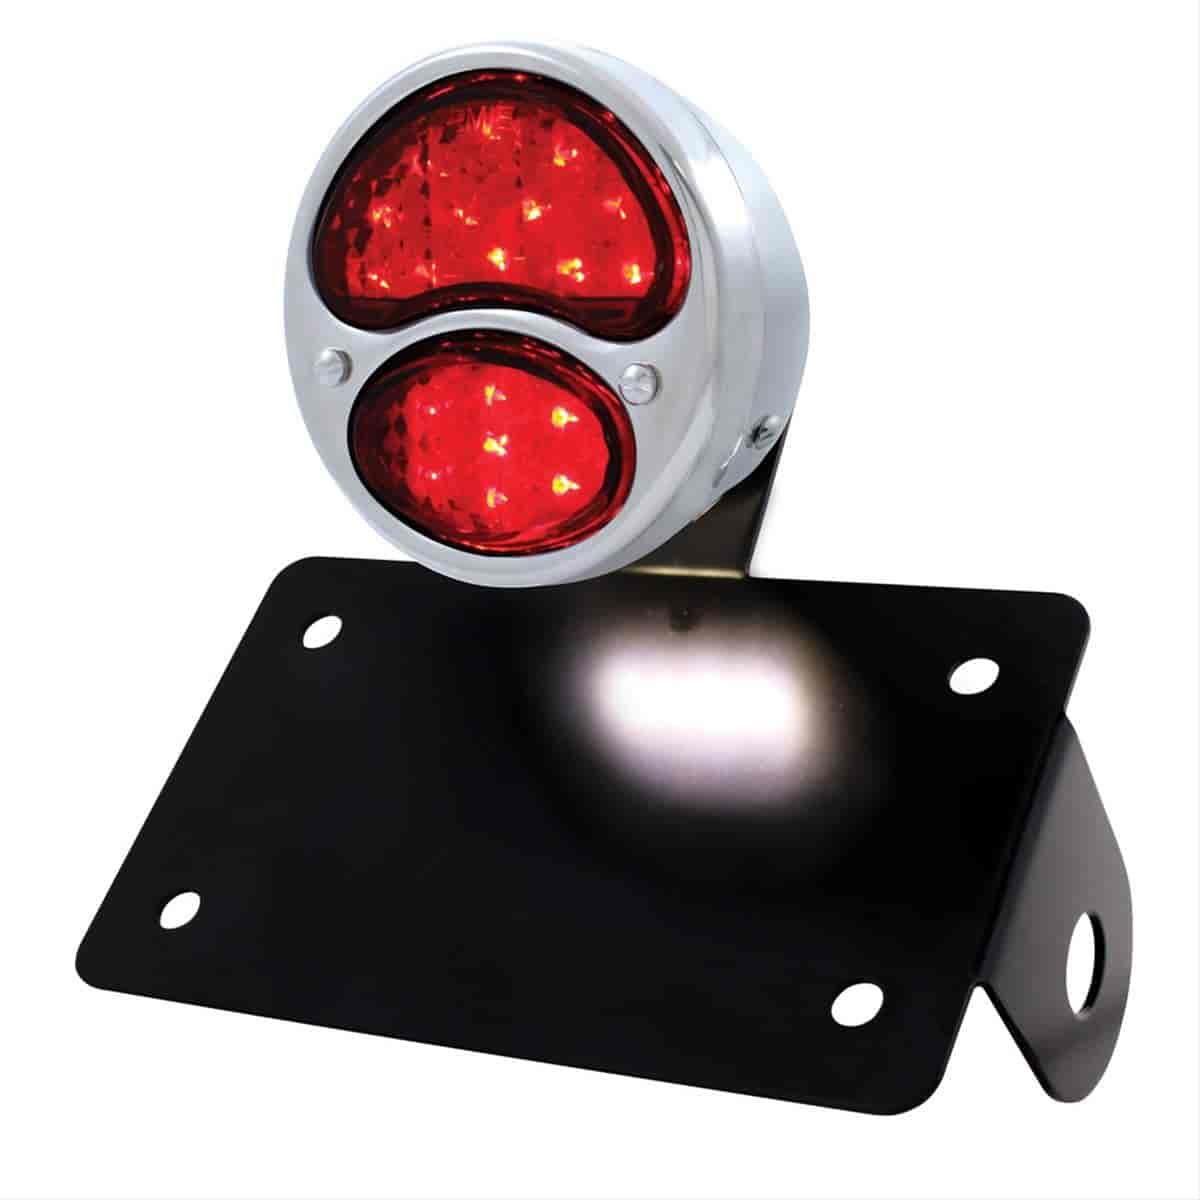 DUO LAMP LED TAILL LIGHT